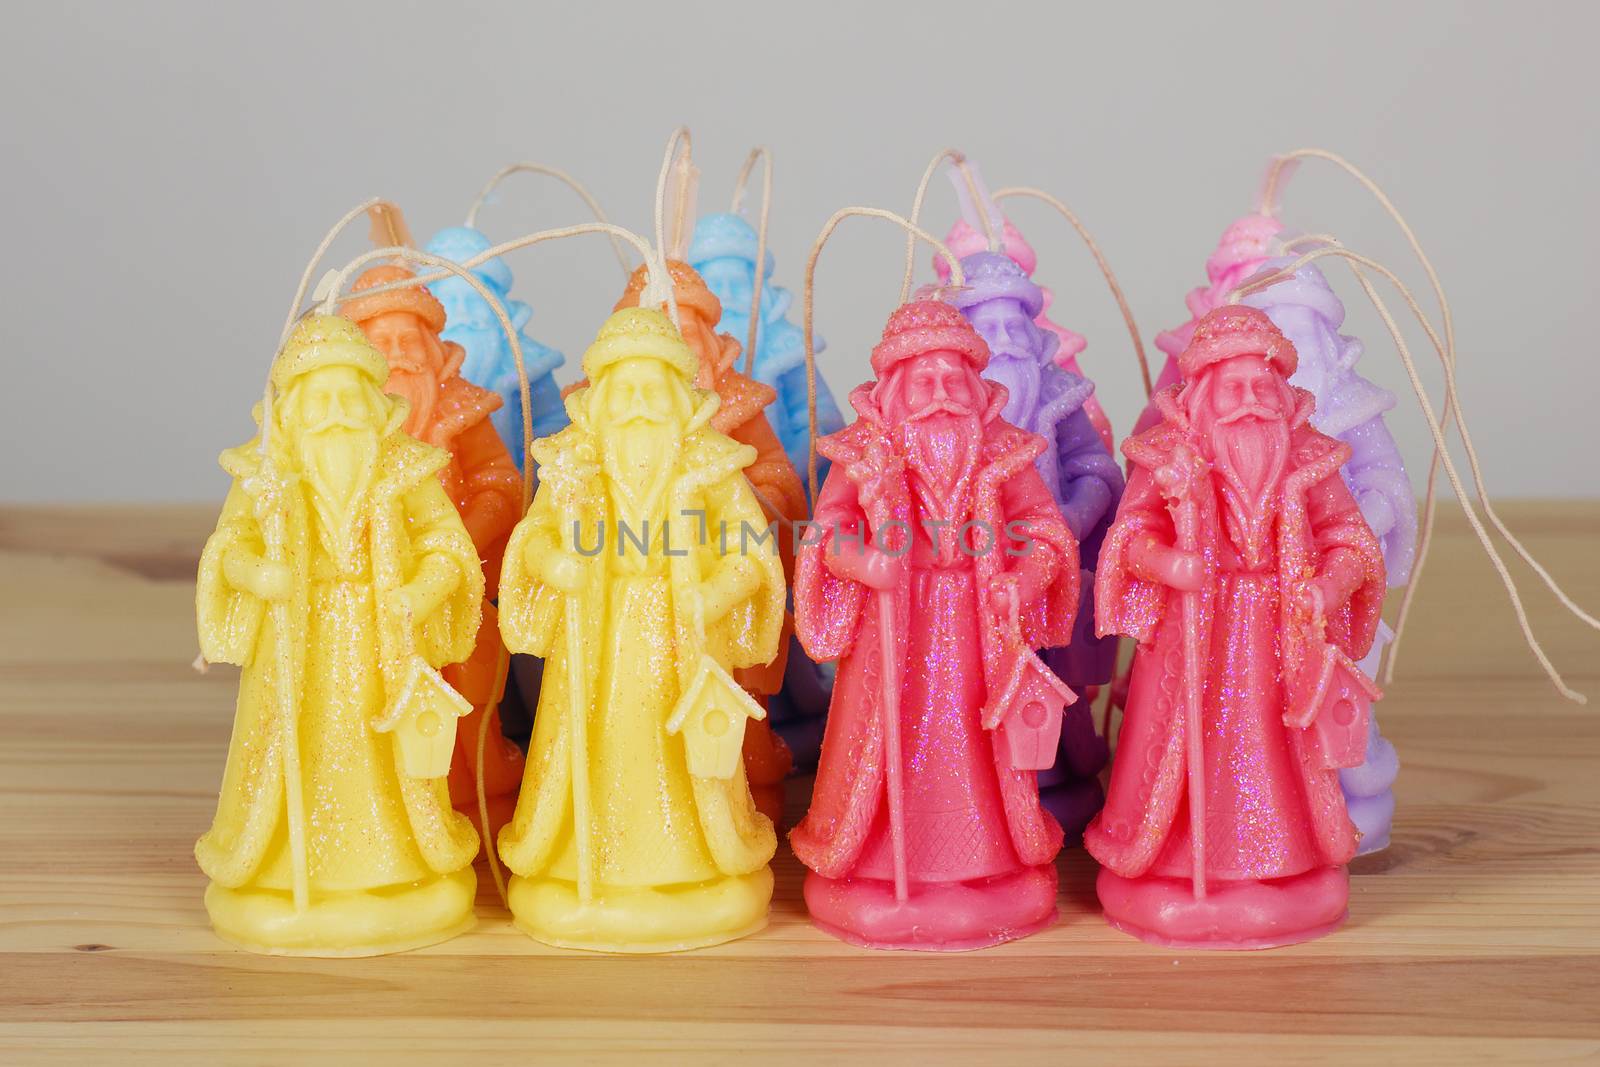 Colorful handmade Souvenir Christmas candles in the shape of Santa Claus on a wooden textural background